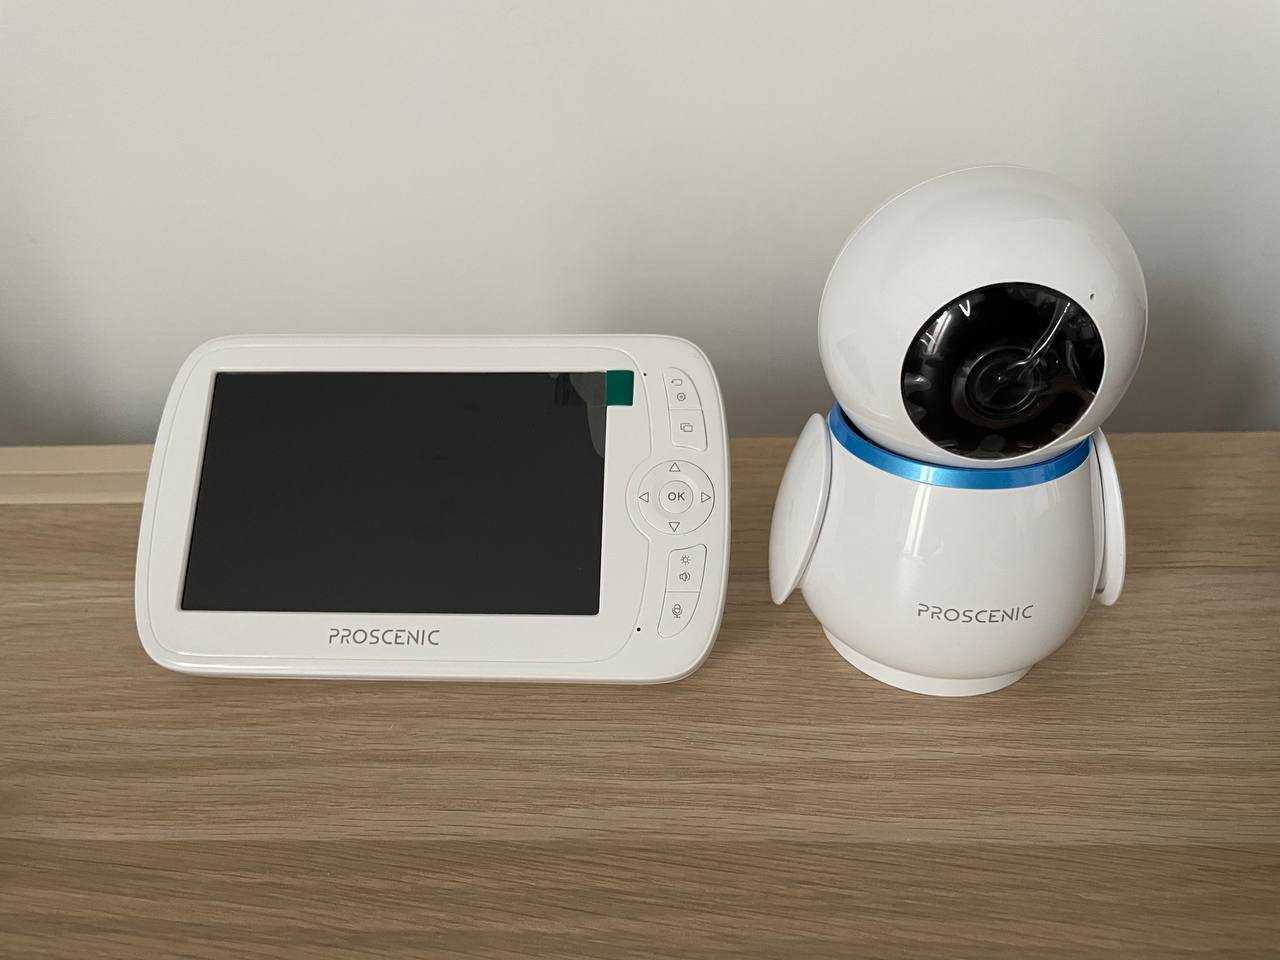 Proscenic BM300 review: a powerful and easy to use baby monitor